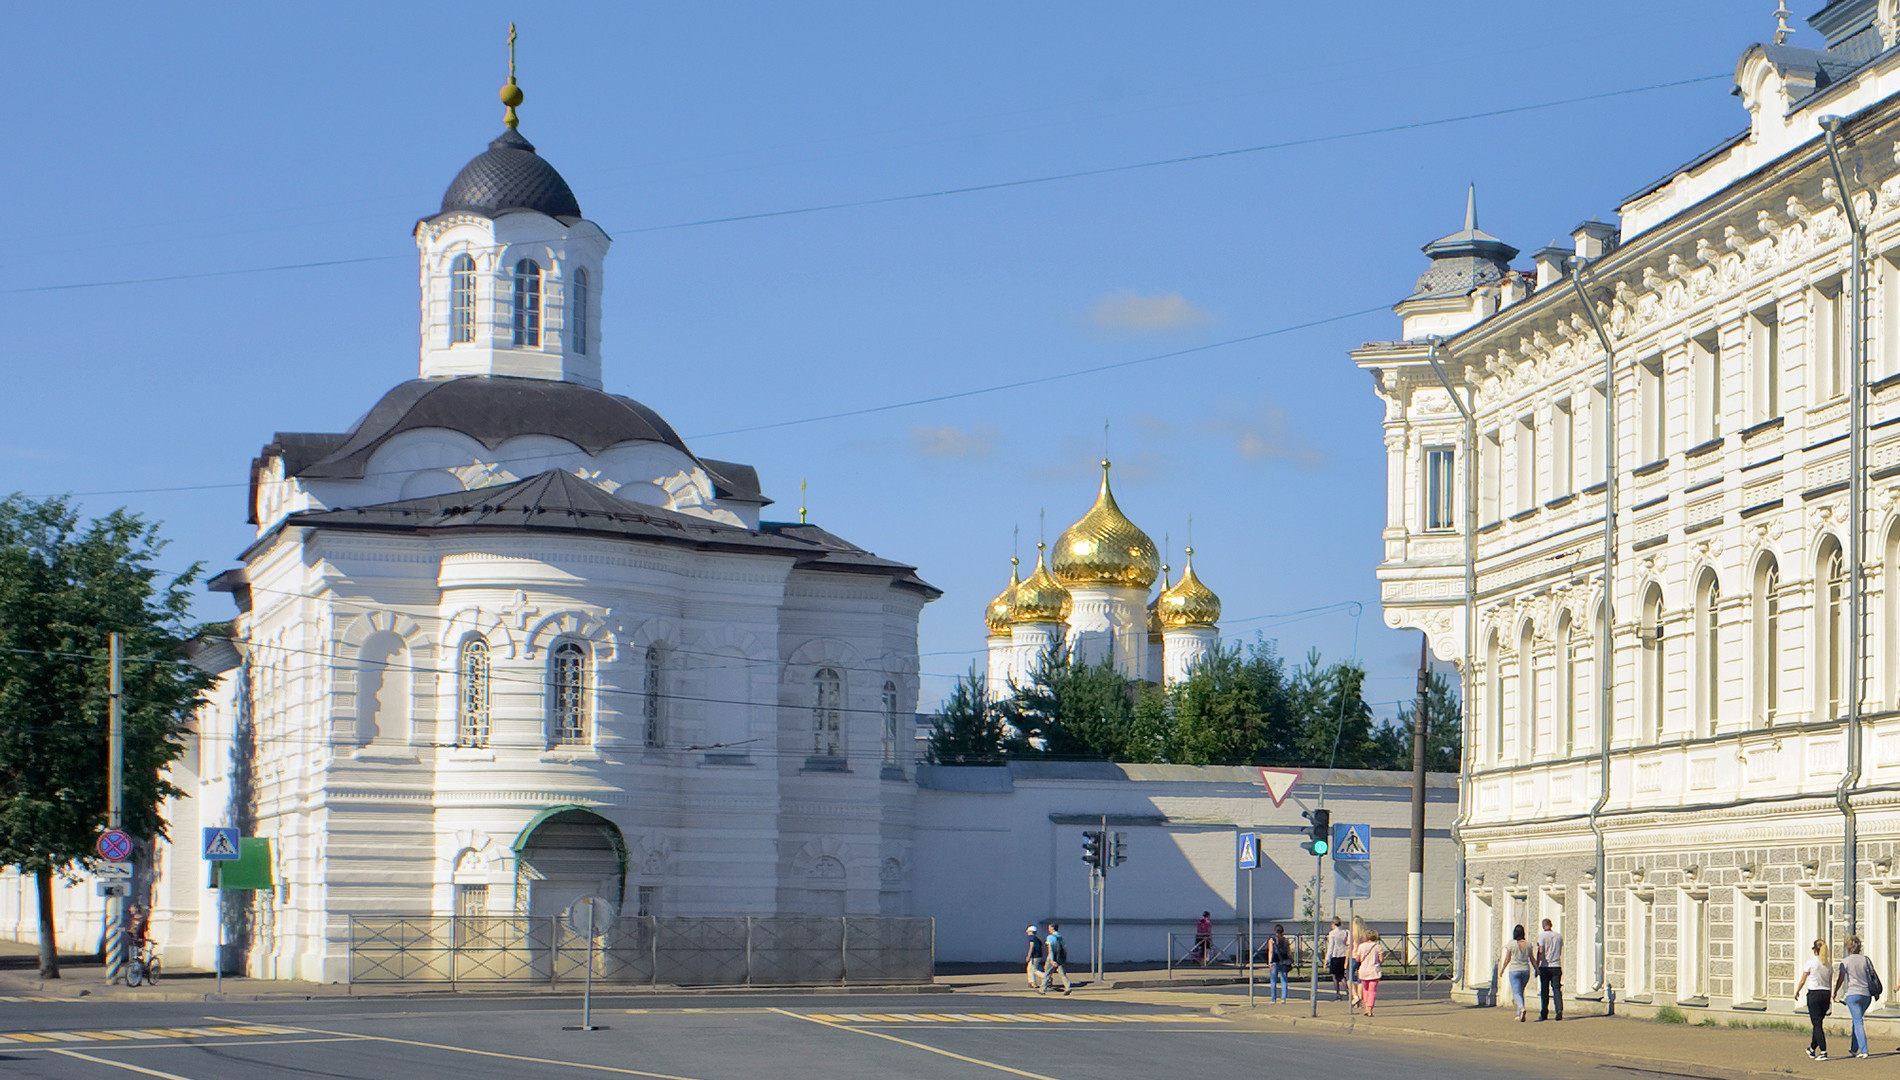 Kostroma. Epiphany-St. Anastasia Convent. From left: Church of Smolensk Icon of the Virgin, Epiphany Cathedral, Tretyakov Building. August 12, 2017.